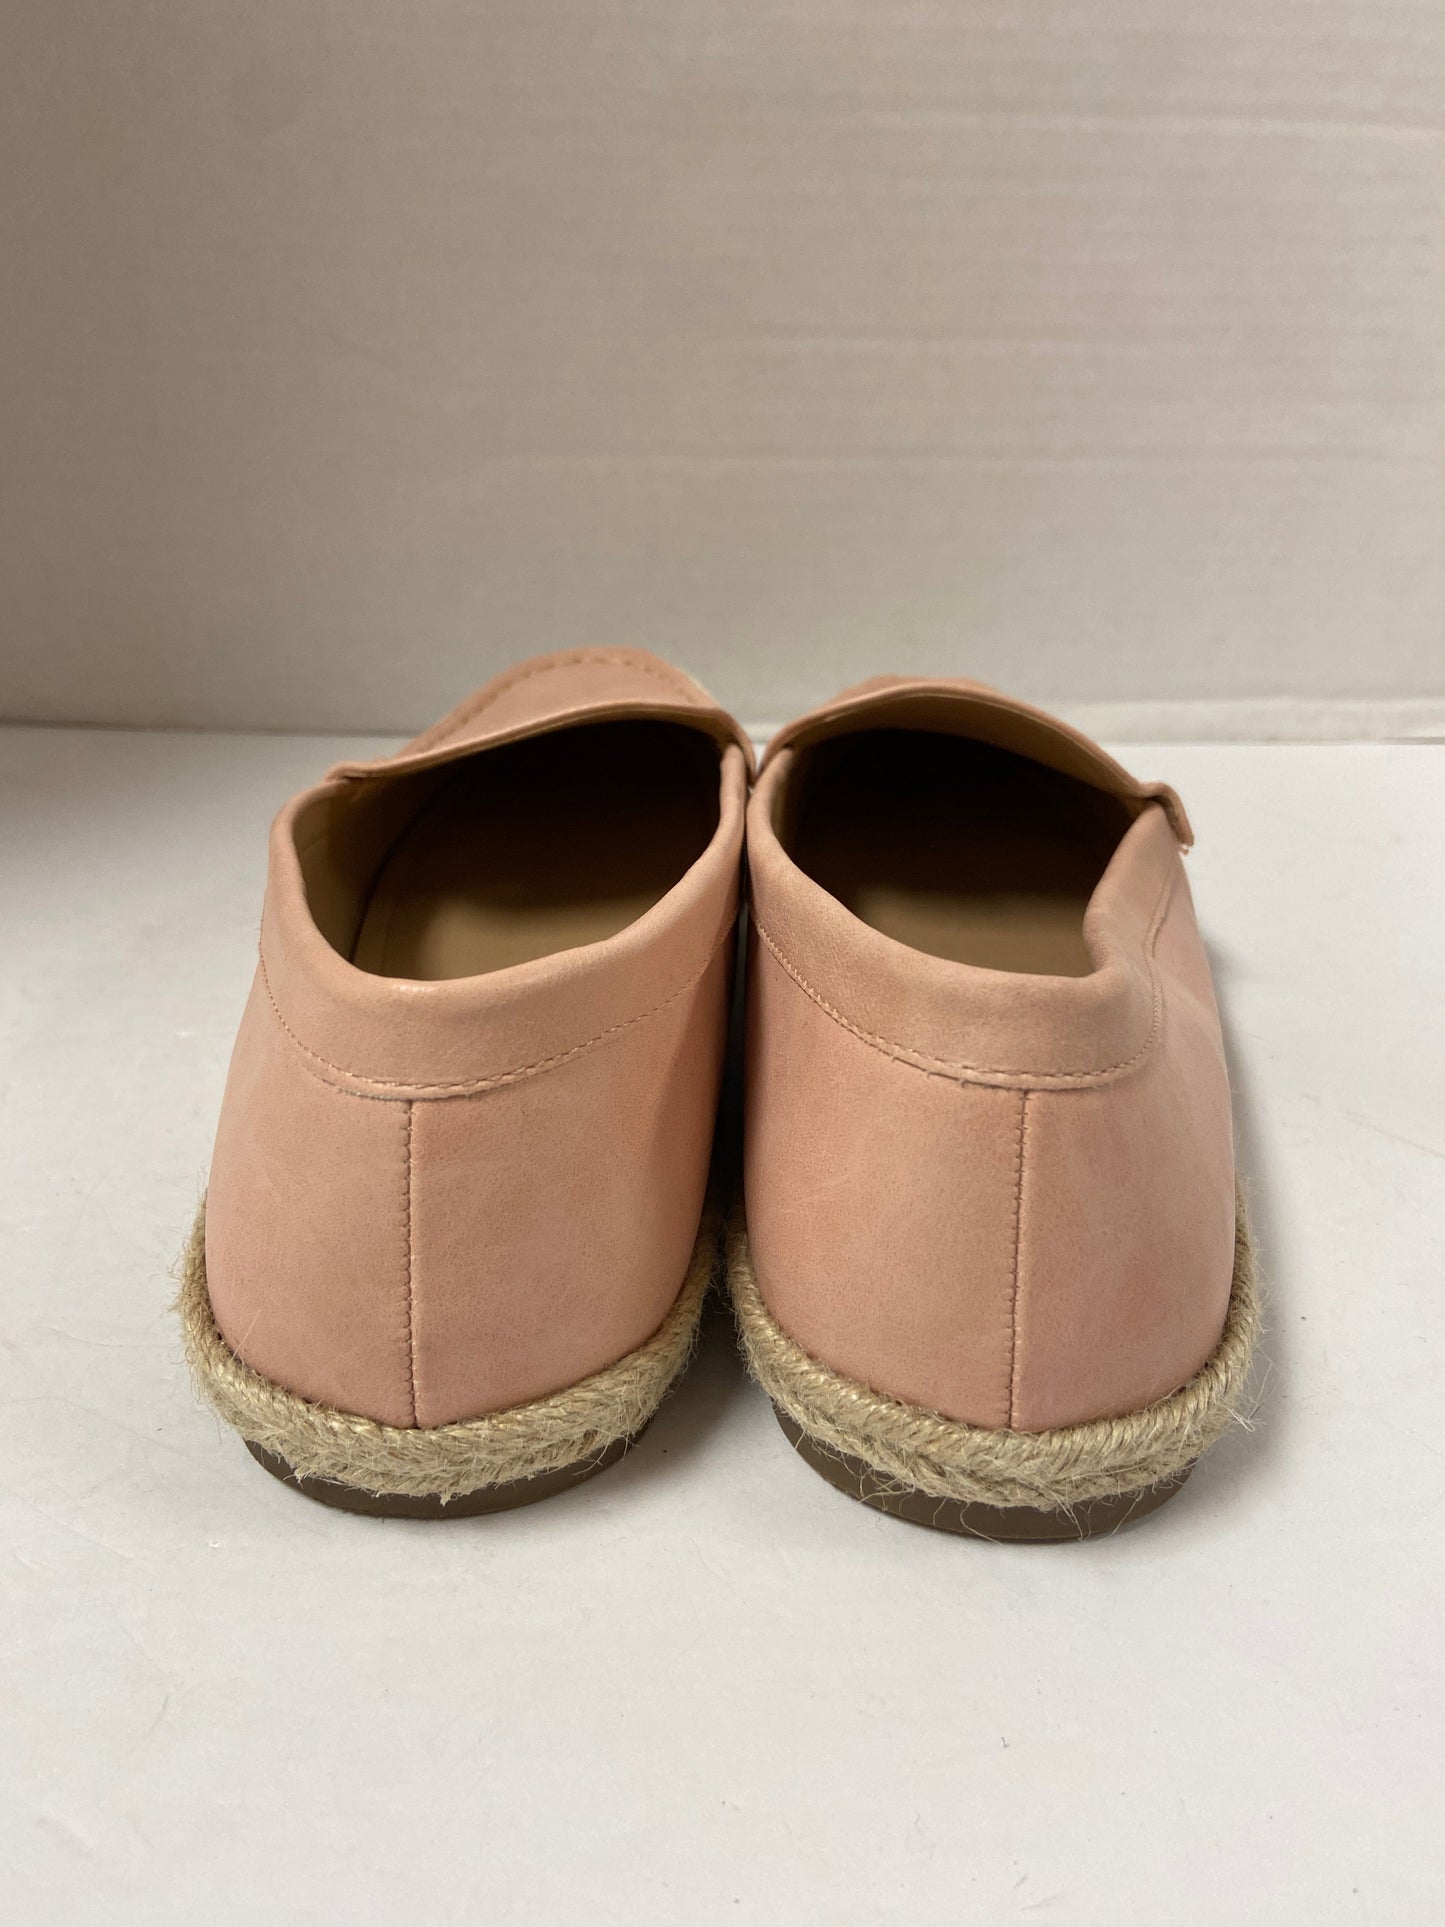 Shoes Flats Espadrille By Clothes Mentor  Size: 8.5